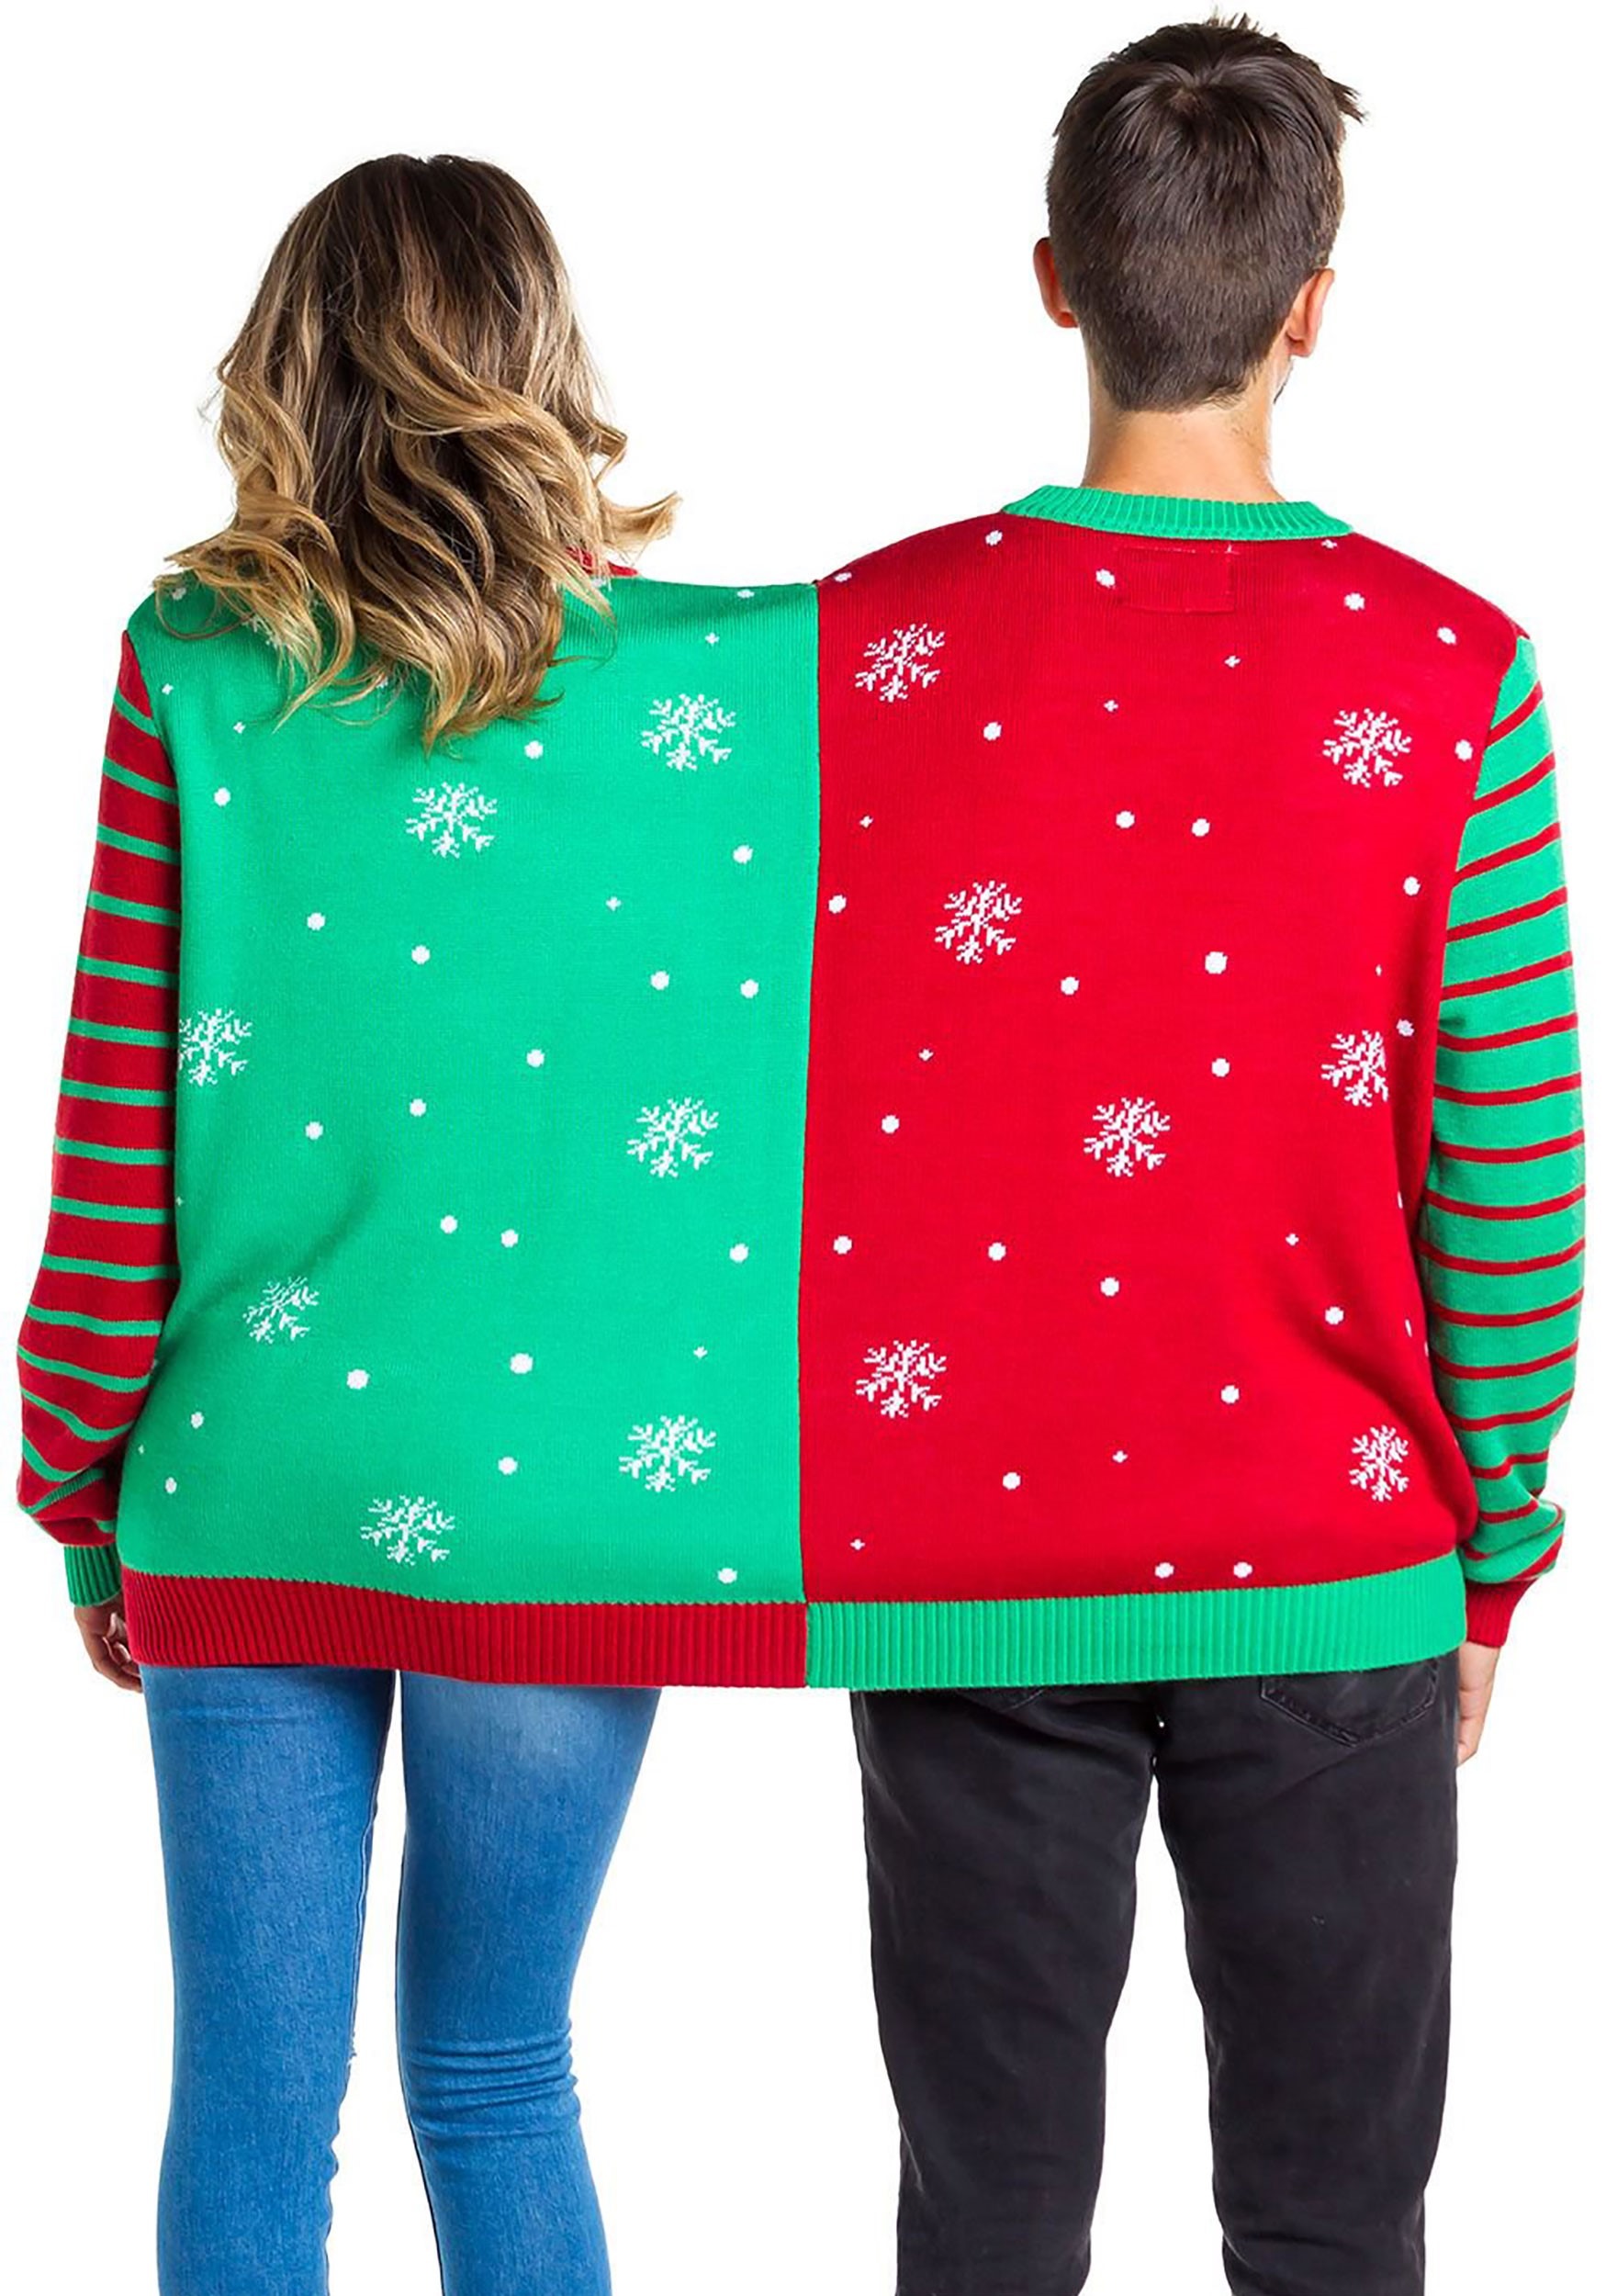 Tipsy Elves Naughty And Nice Two Person Ugly Christmas Sweater